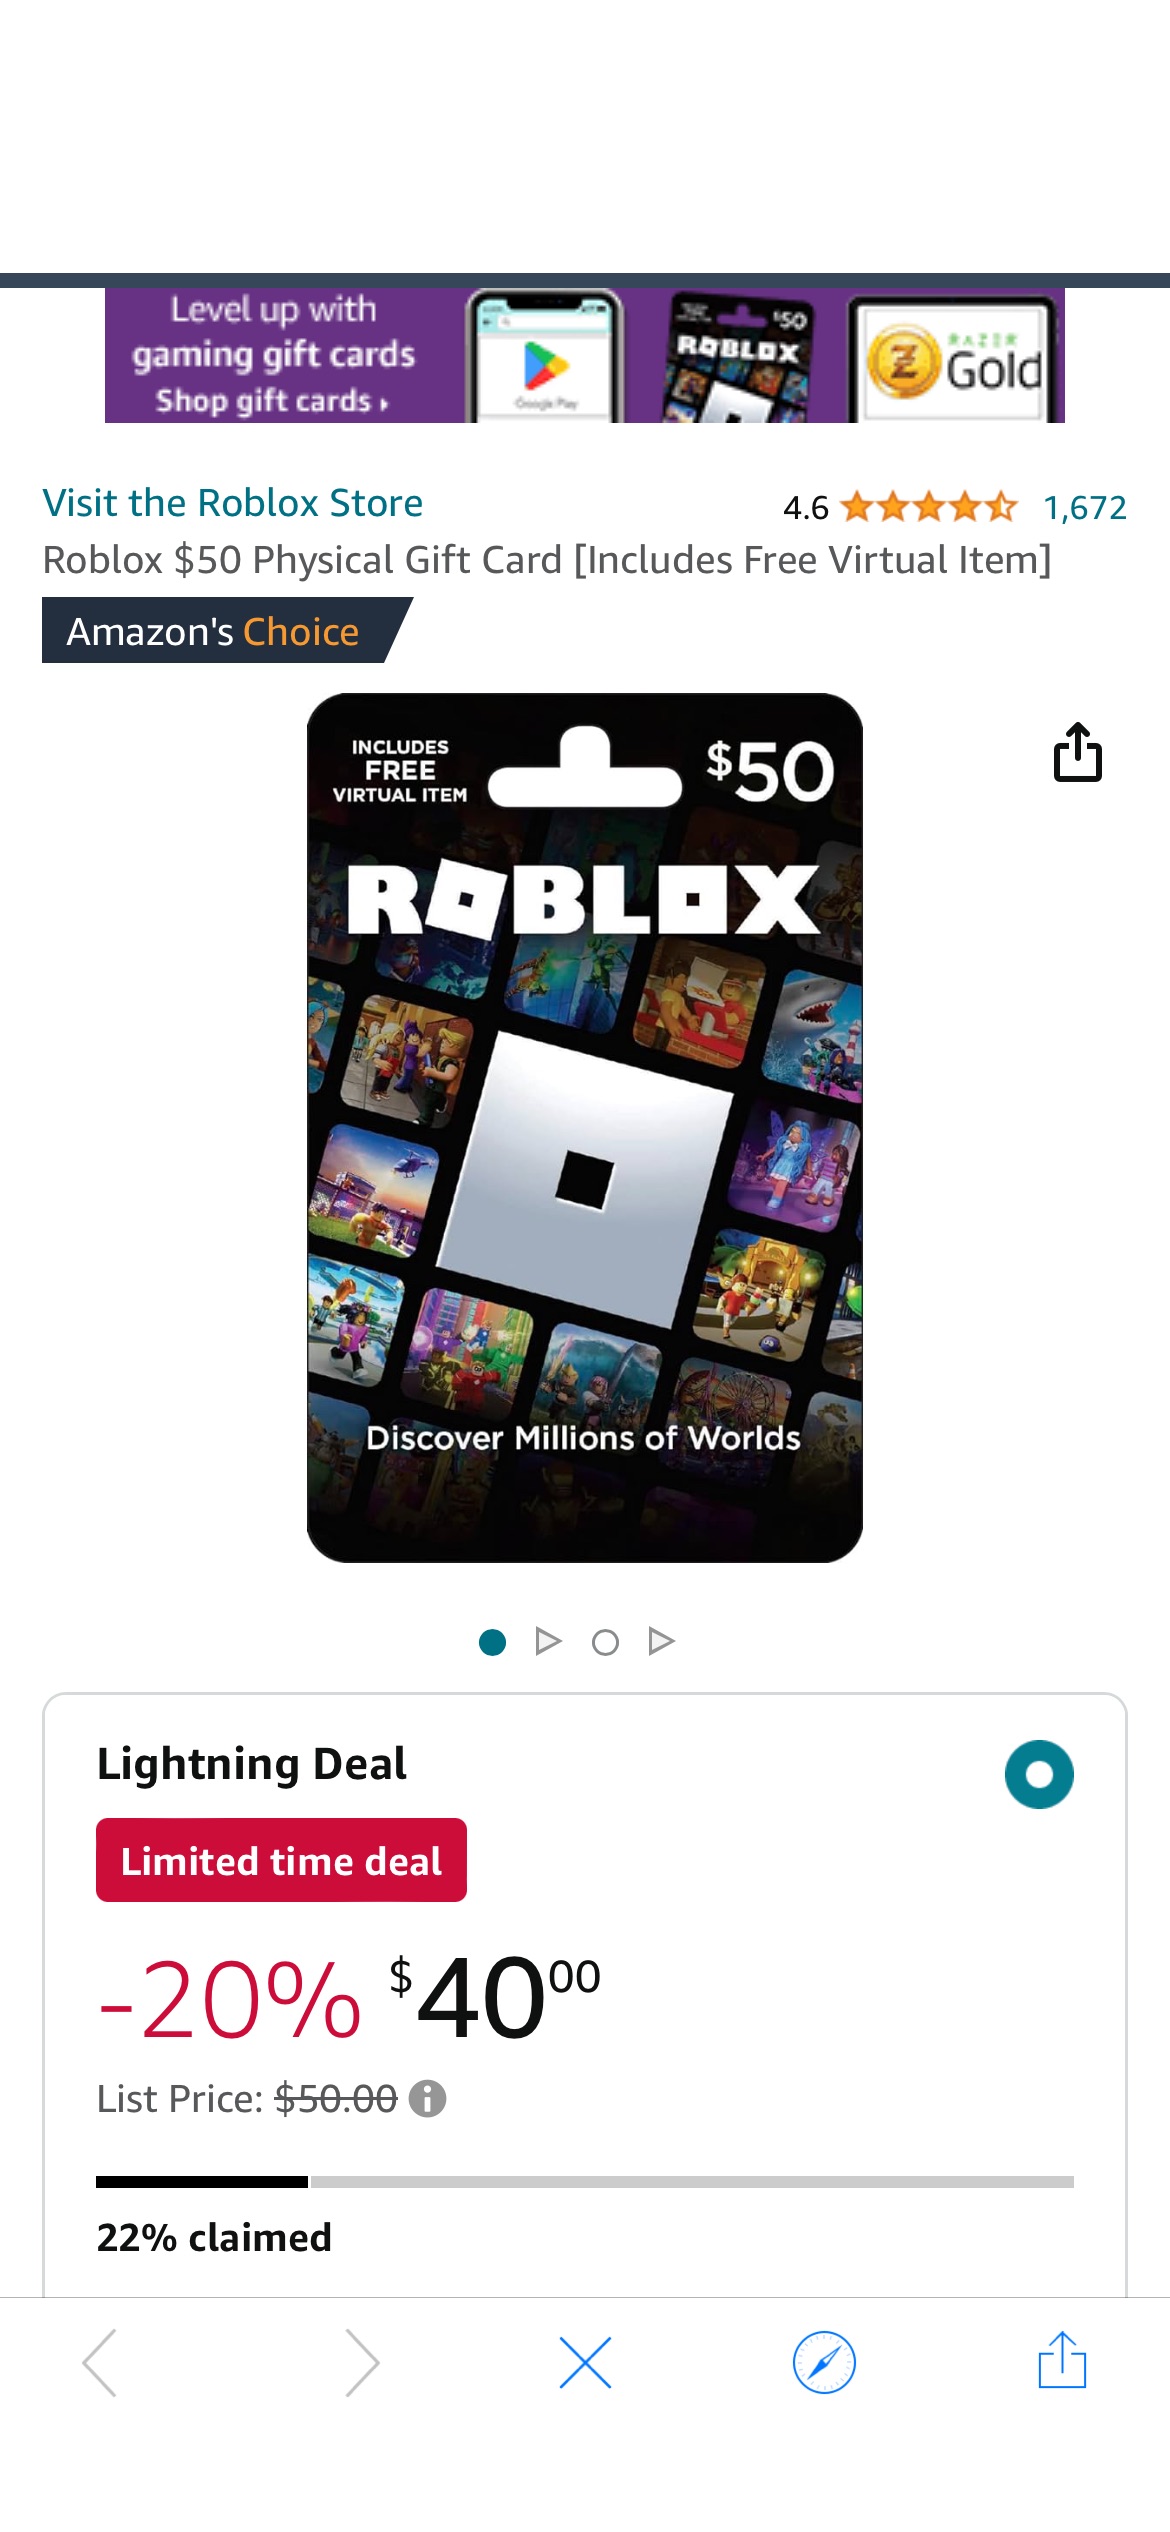 Amazon.com: Roblox $50 Physical Gift Card [Includes Free Virtual Item] : Gift Cards